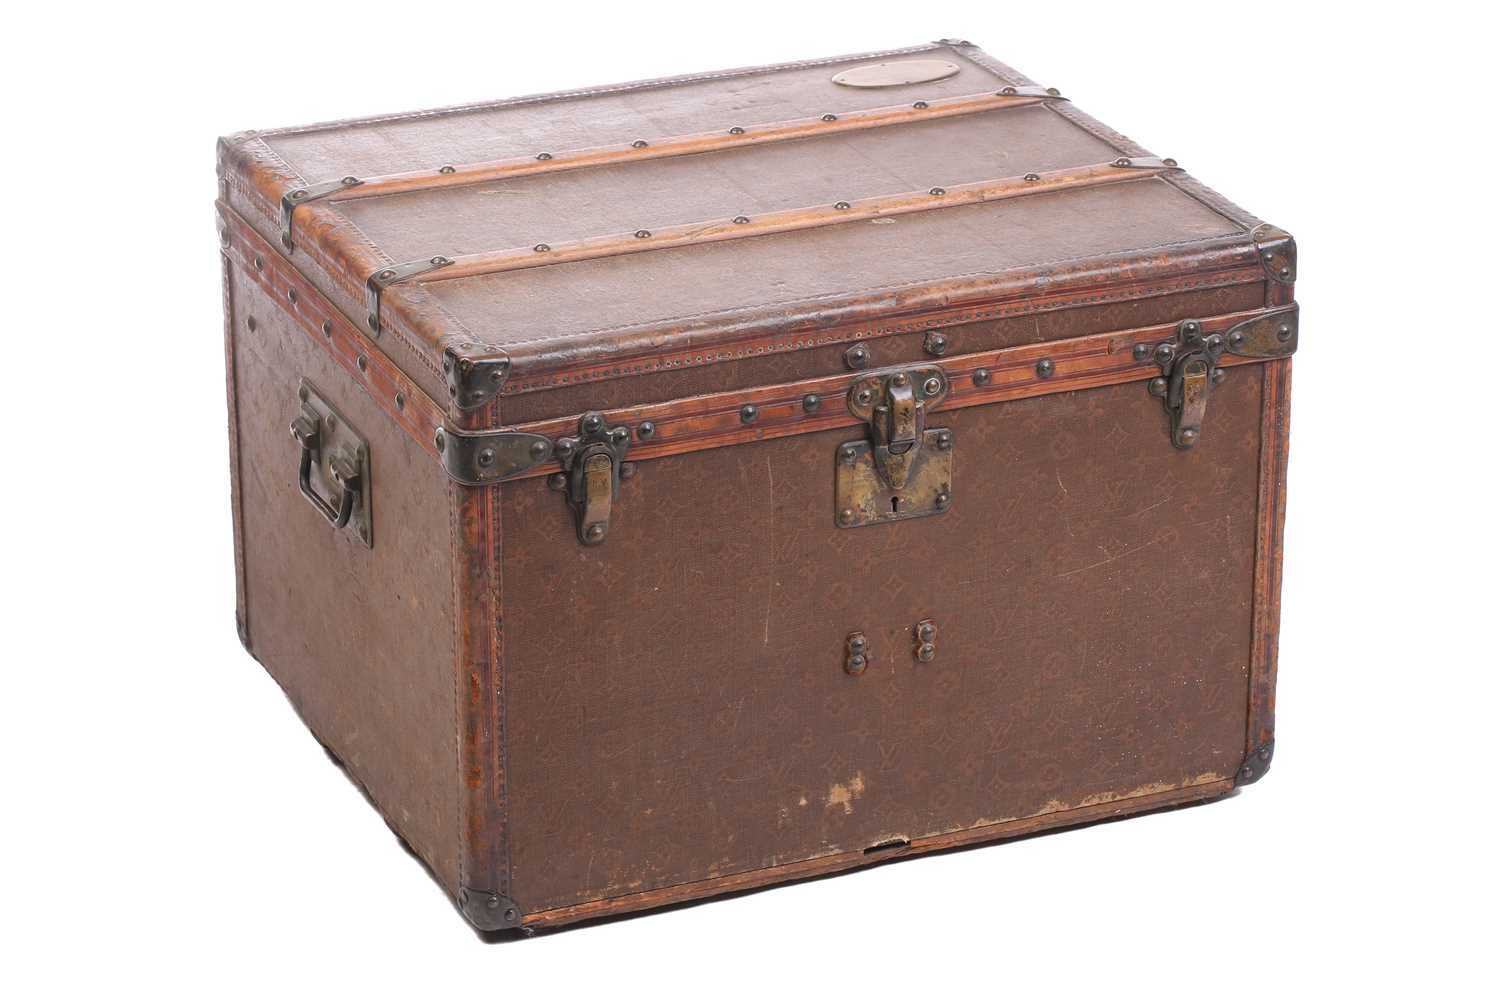 Sold at Auction: Louis Vuitton Early 20th Century Trunk